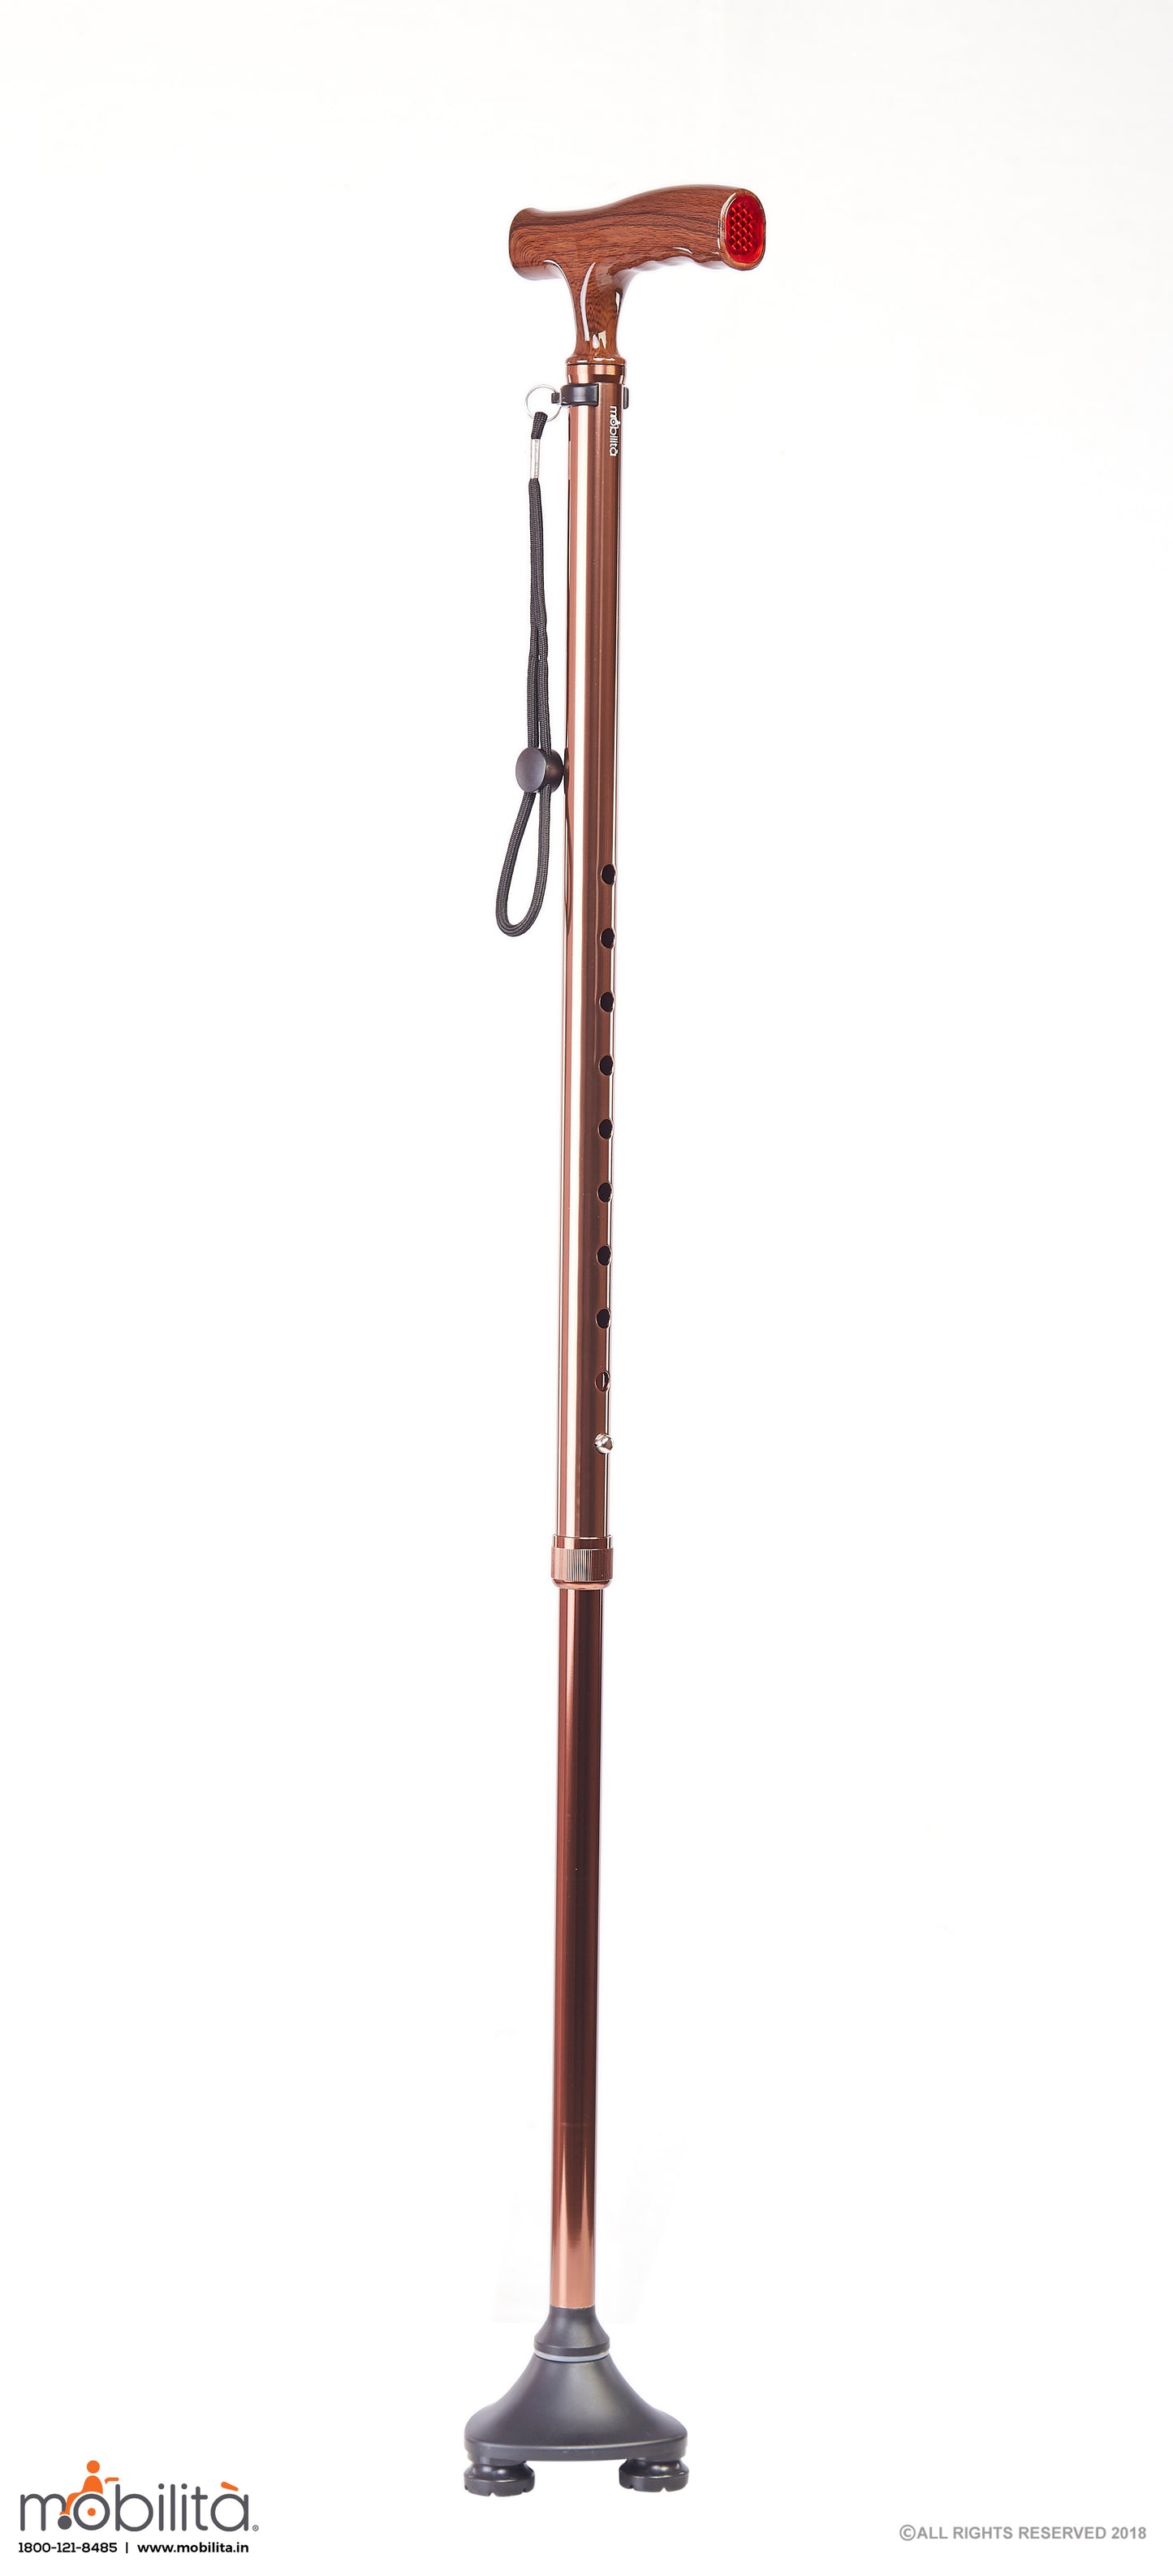 M 702 - Walking Cane - Triangle foot - Straight Shank - Champagne Brown